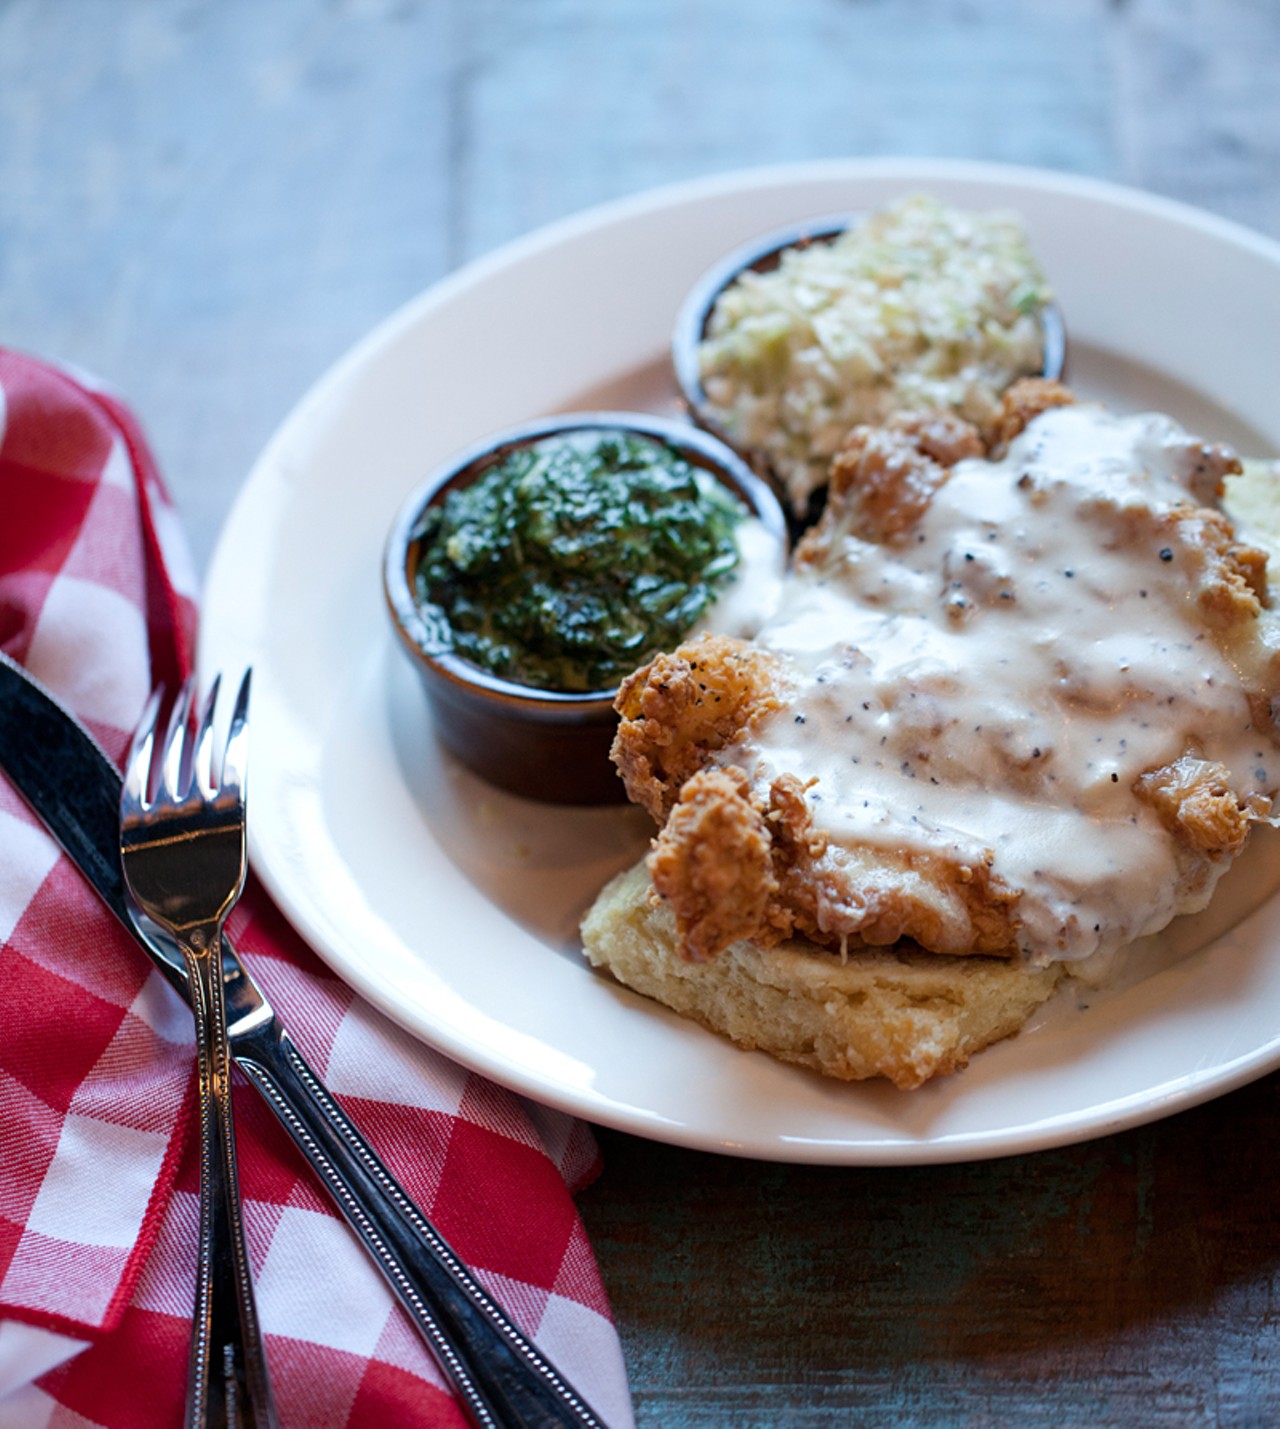 "Chicken in a Biscuit" is buttermilk-fried chicken breast with milk gravy, topped with cheddar cheese and served on a buttermilk biscuit. It's shown here with sides of creamed spinach and slaw.